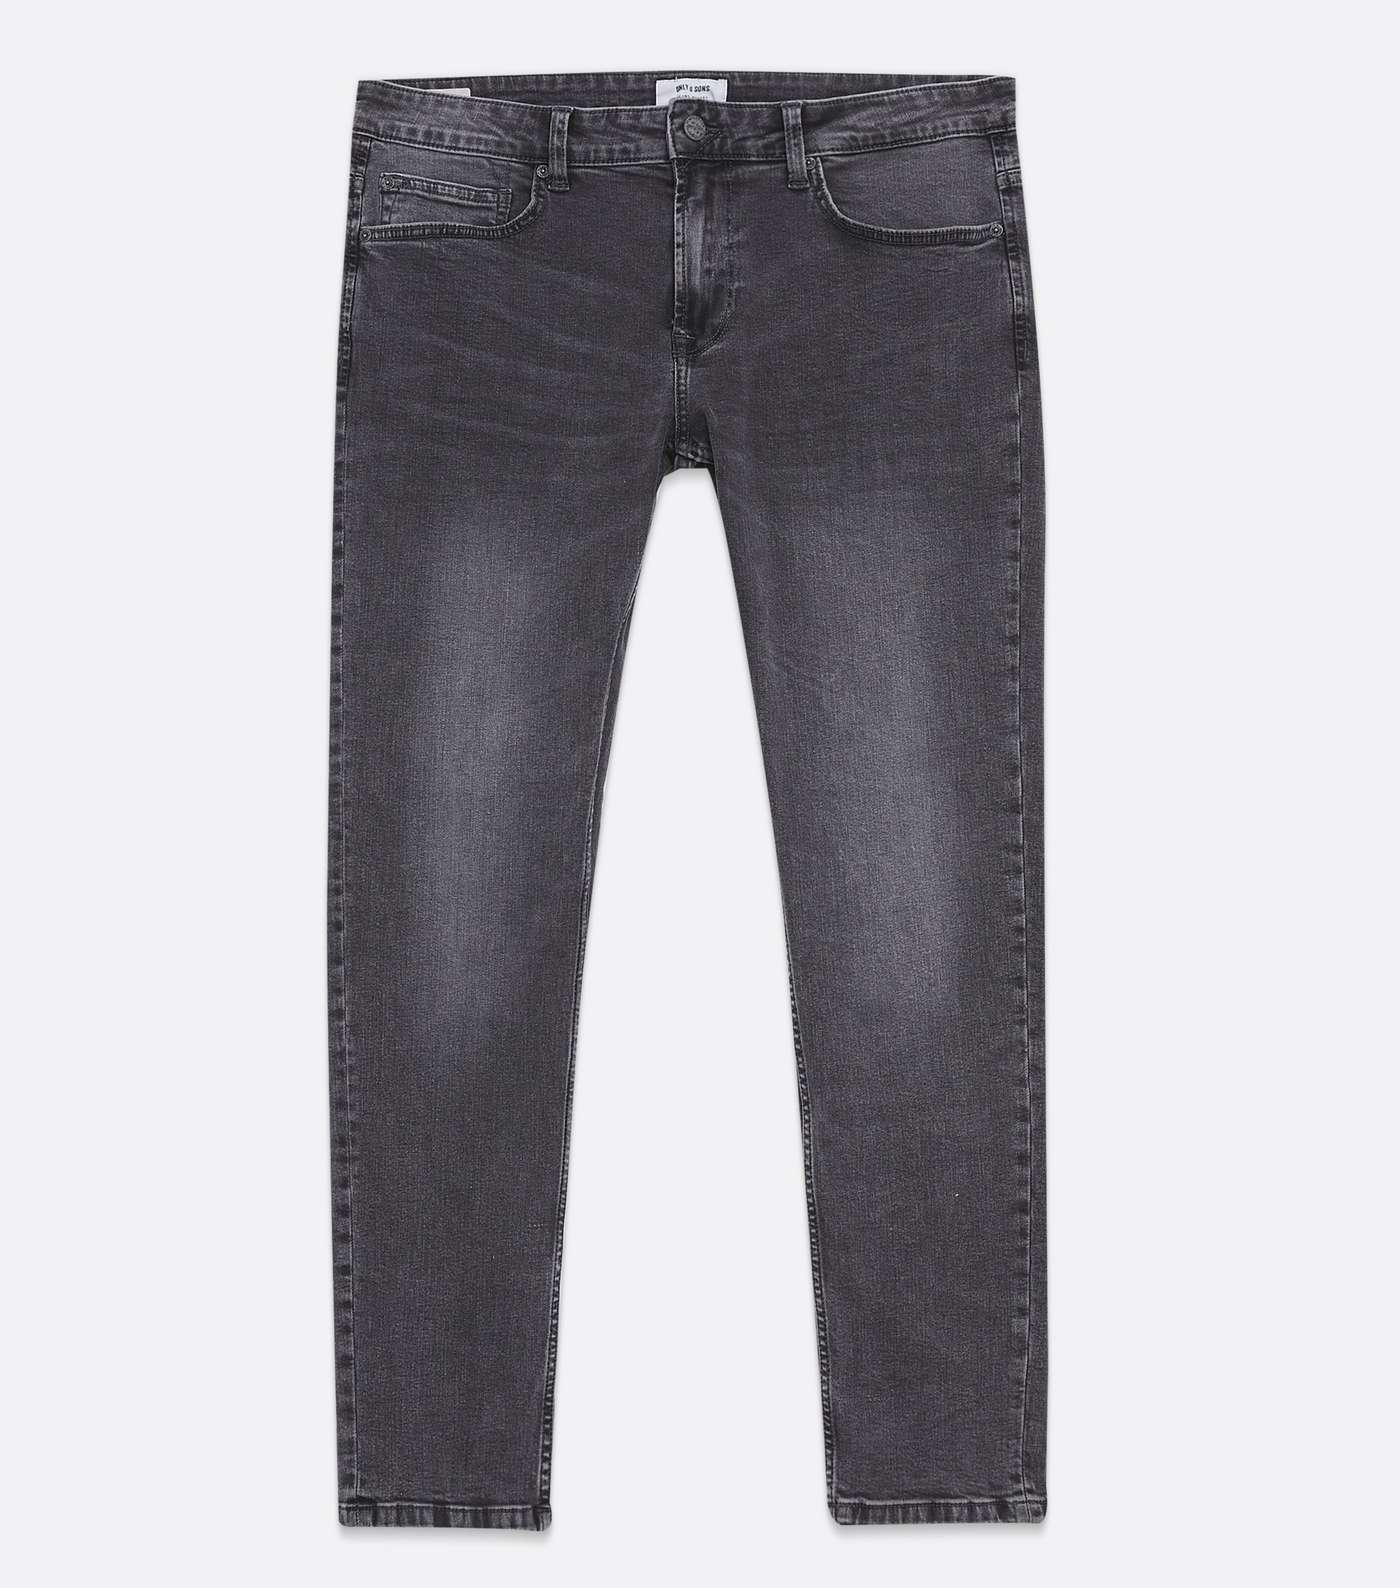 Only & Sons Dark Grey Washed Skinny Jeans Image 5